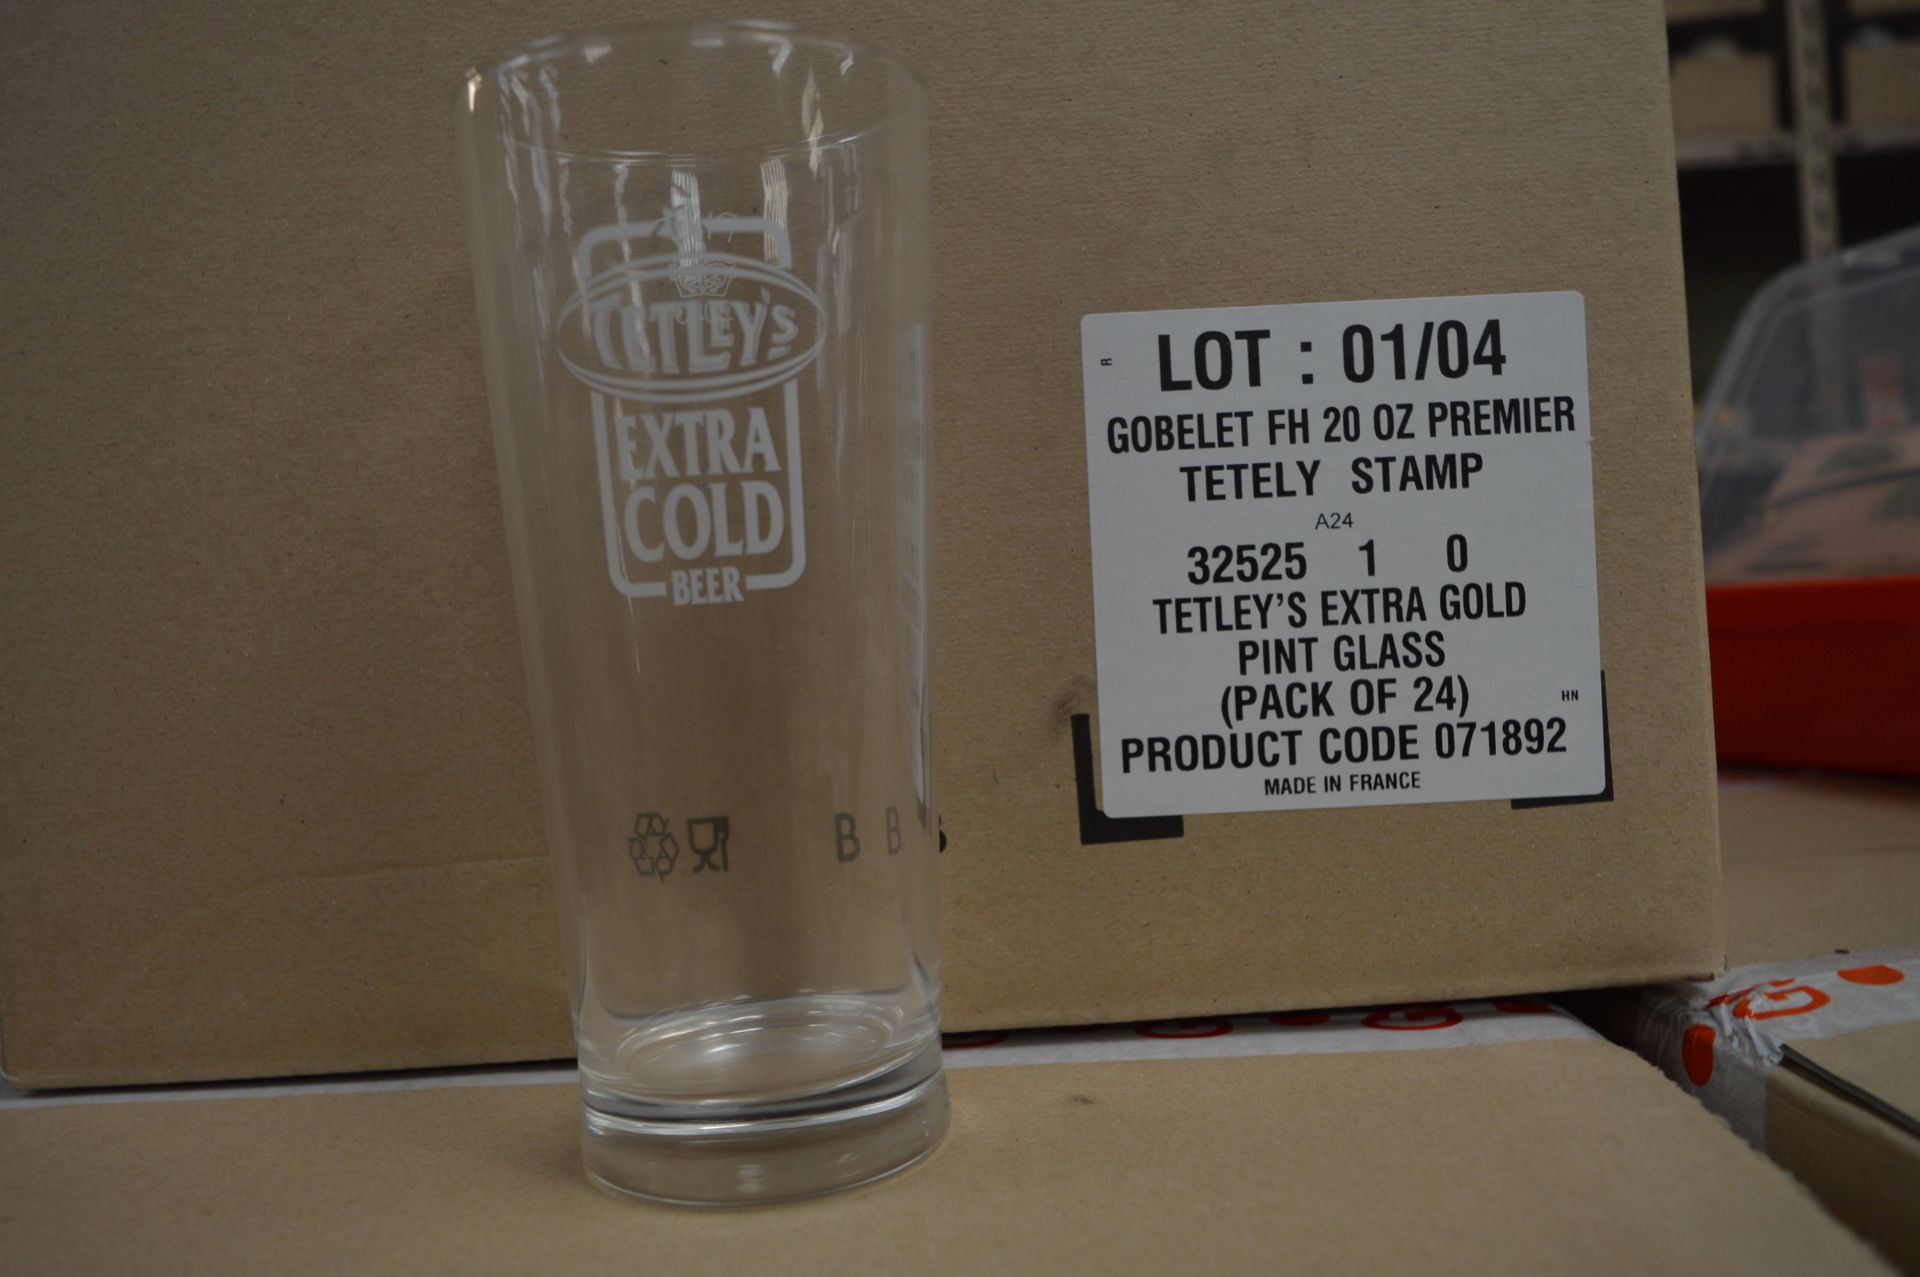 Three Boxes Containing 24 Tetley's Extra Gold Branded Glasses